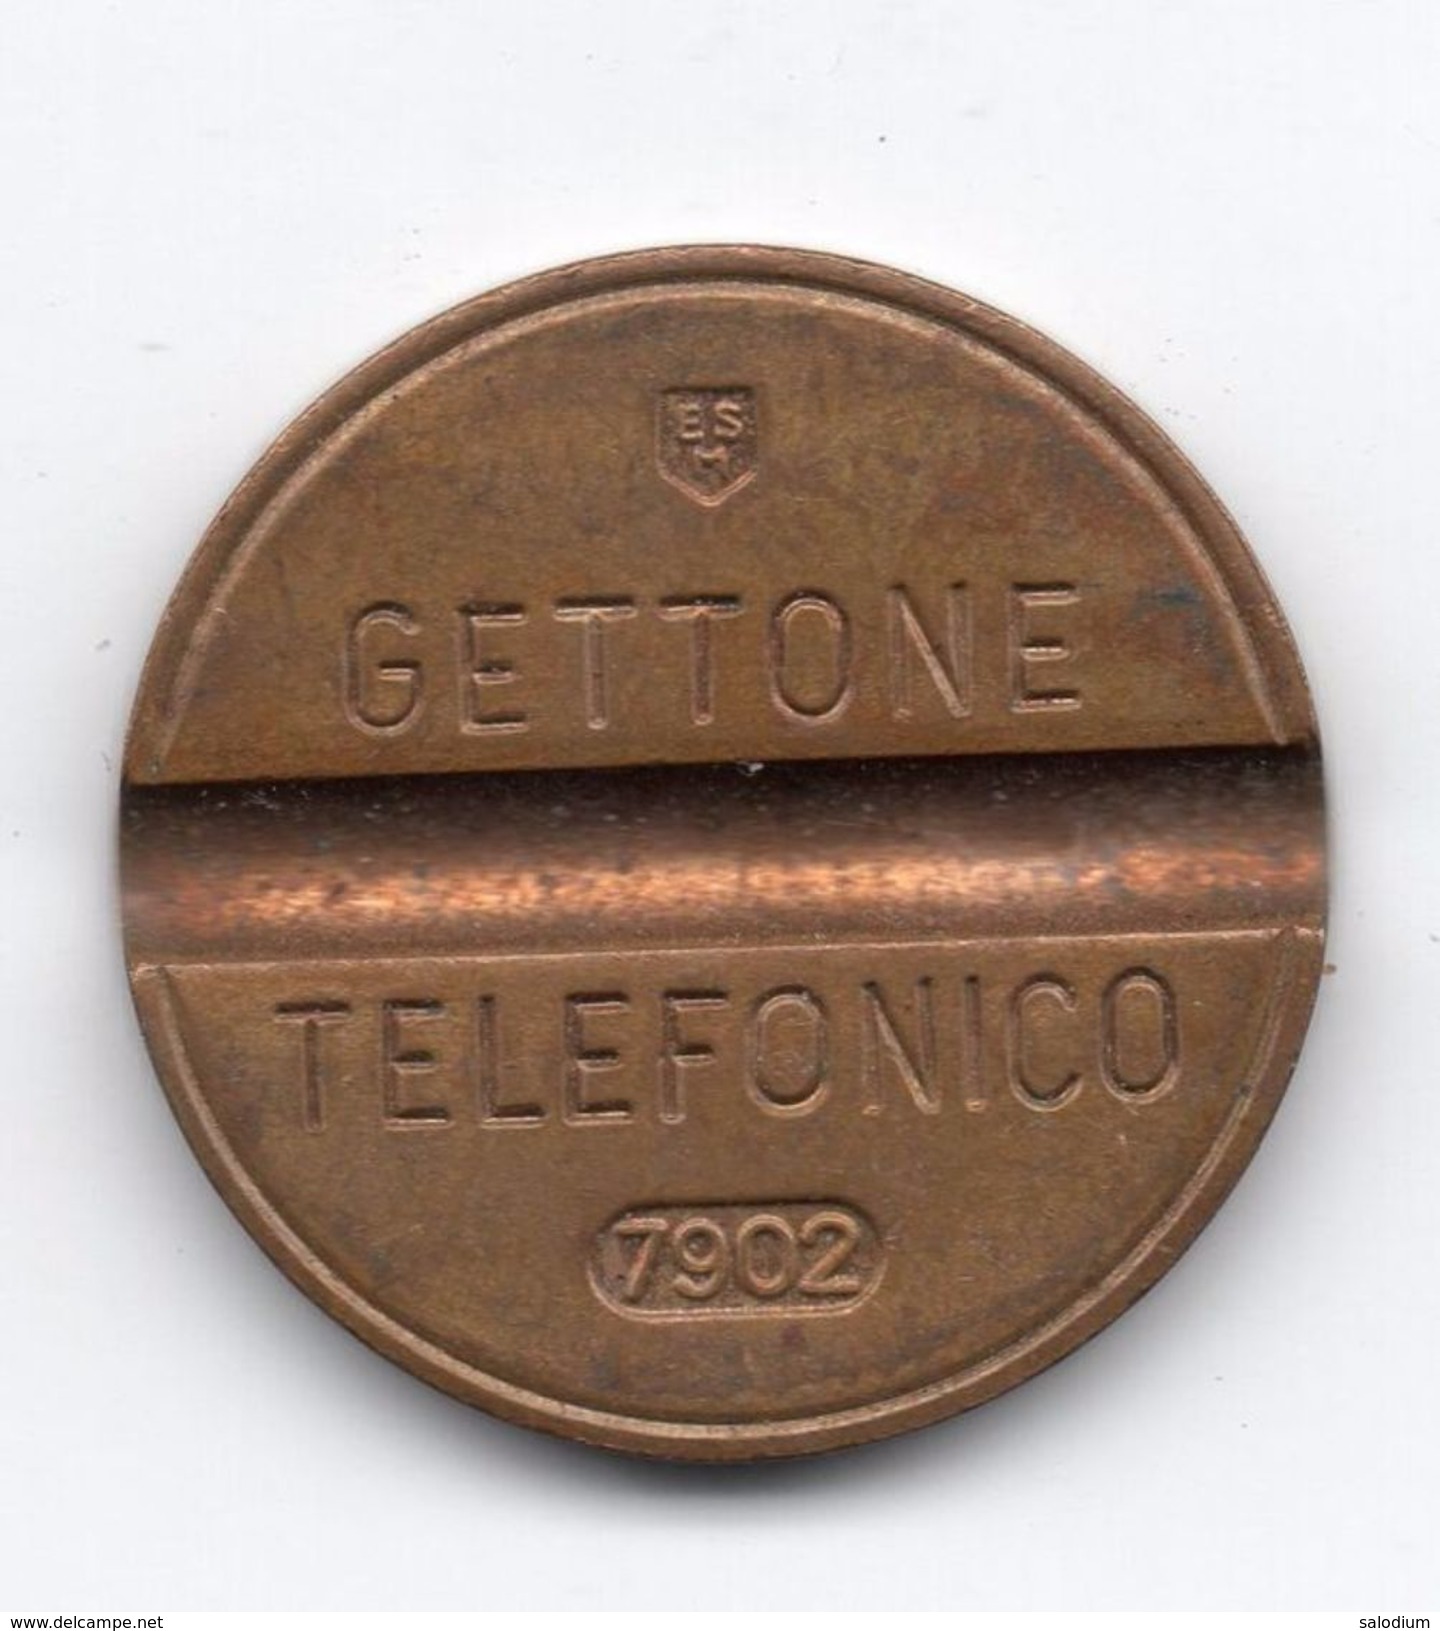 Gettone Telefonico 7902 Token Telephone - (Id-863) - Professionals/Firms